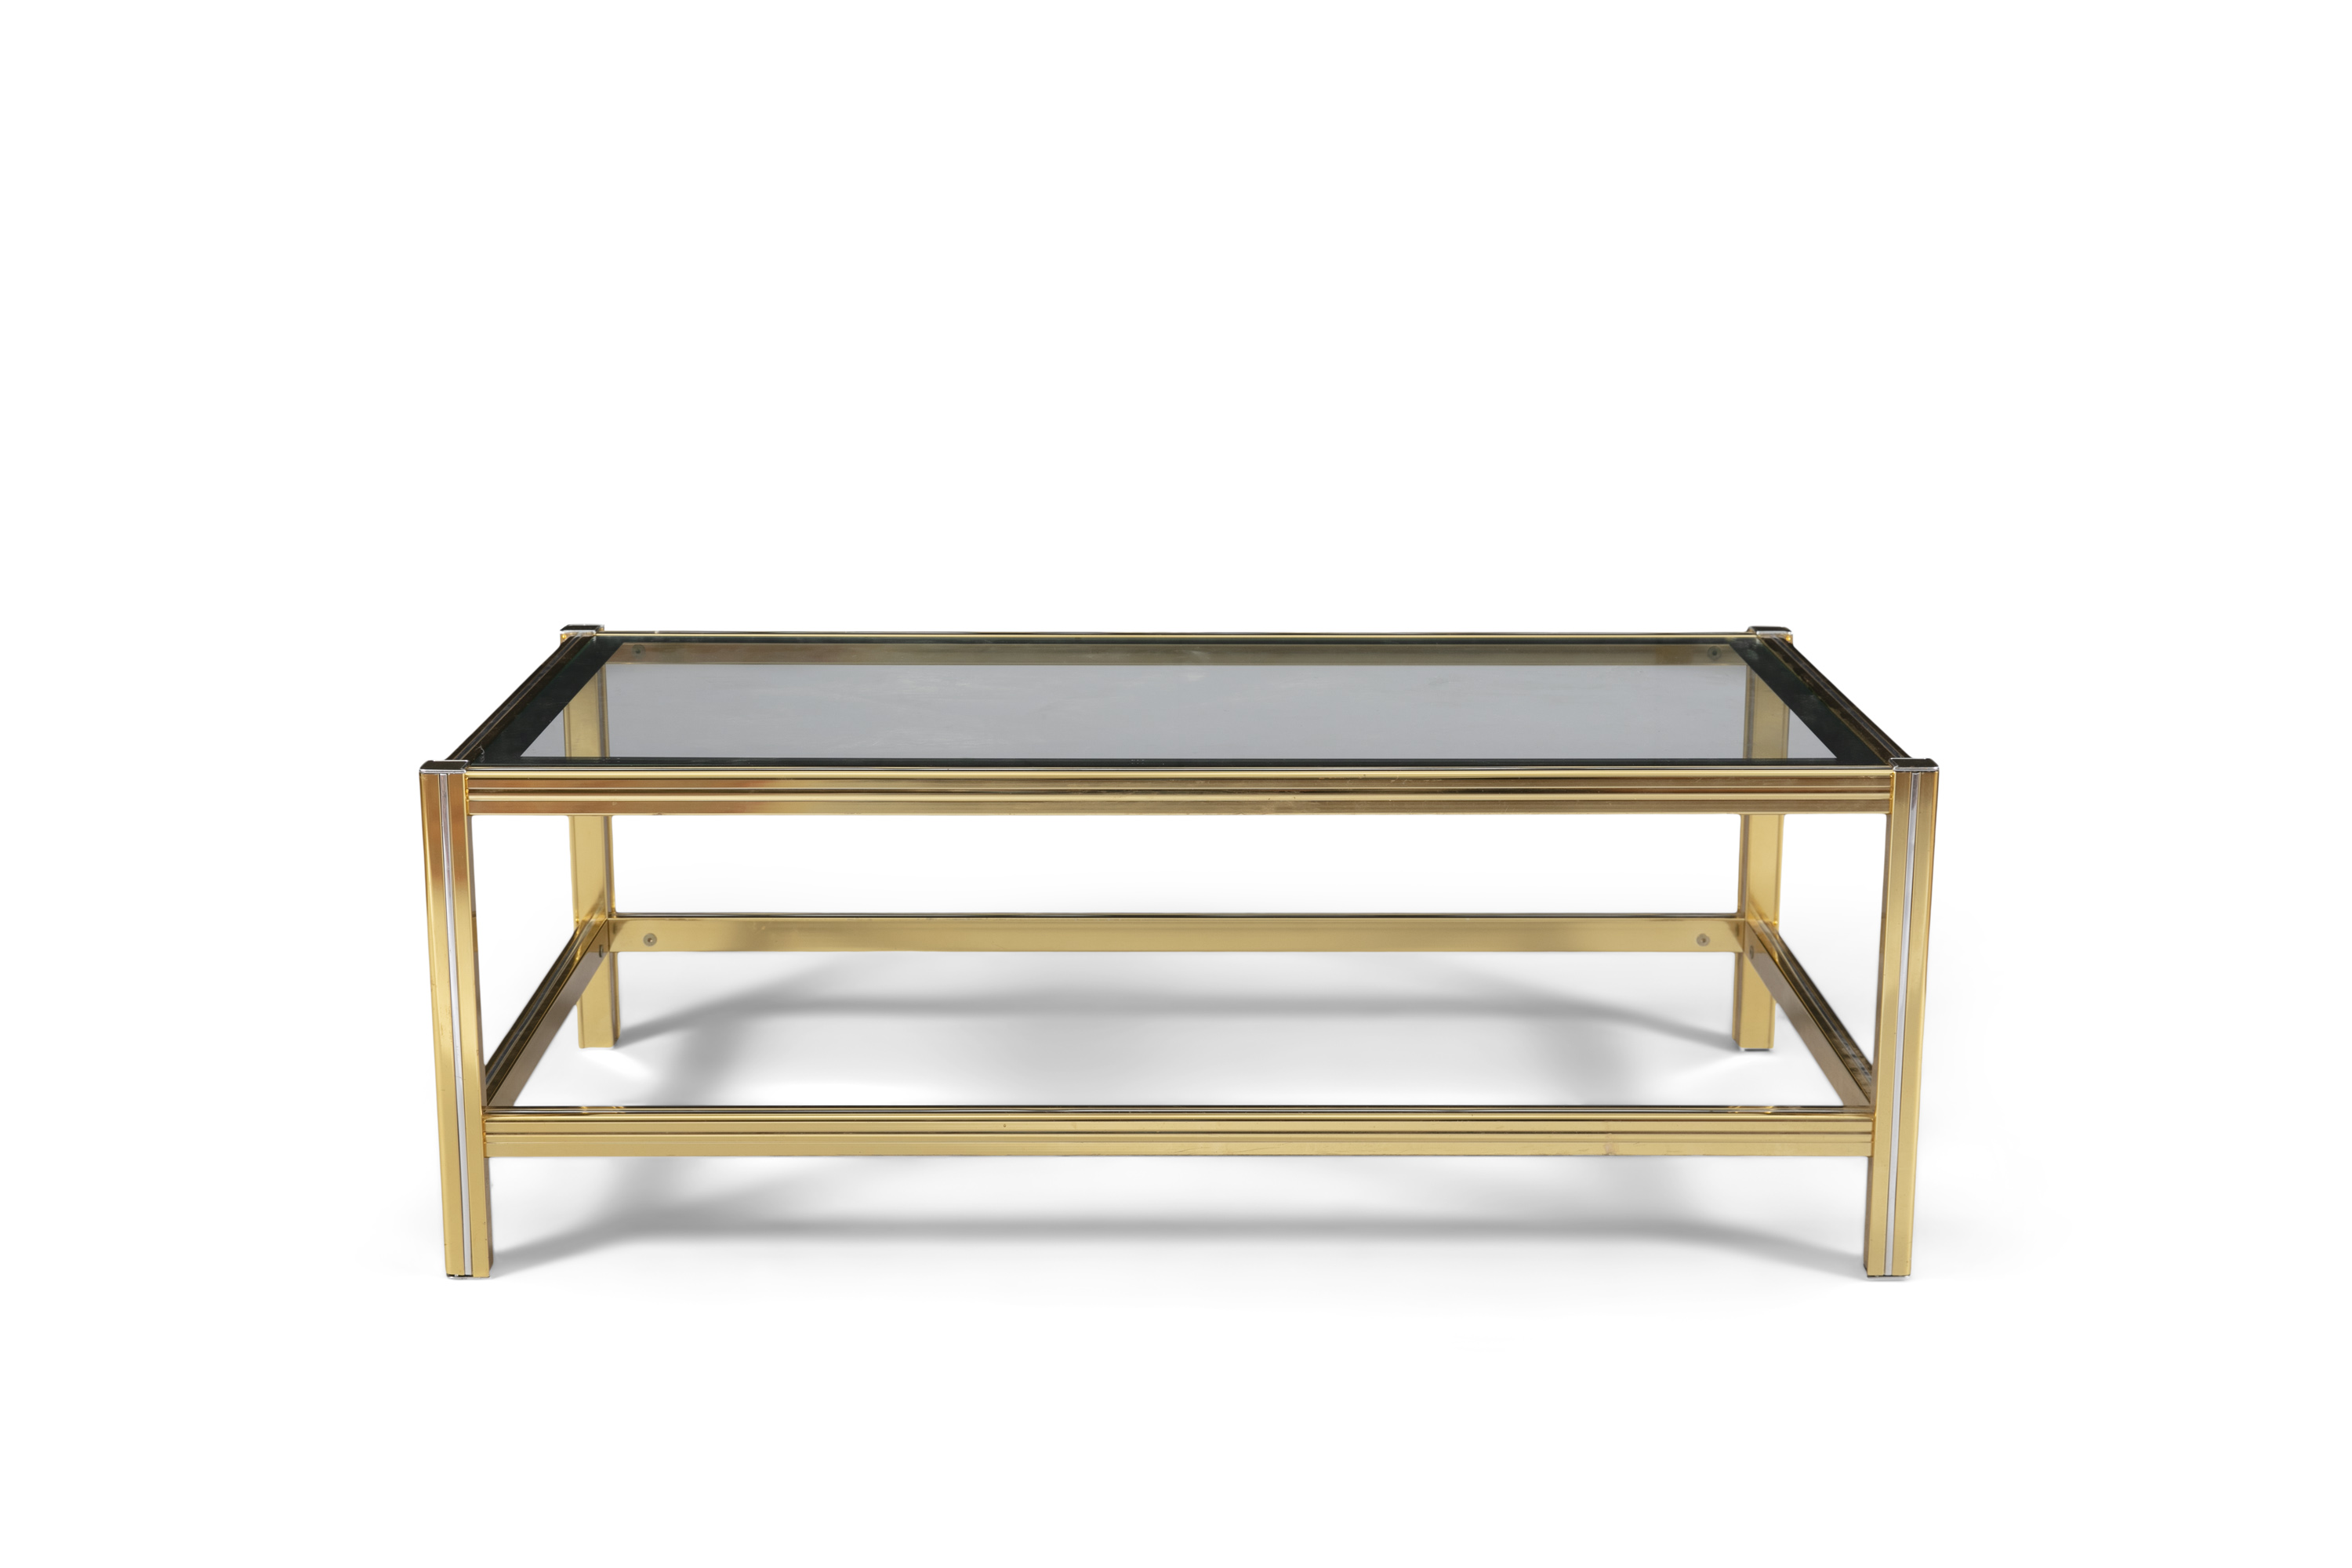 COFFEE TABLE A two tier glass topped coffee table with a brass and chrome base. c. 1960. Italy. 39 x